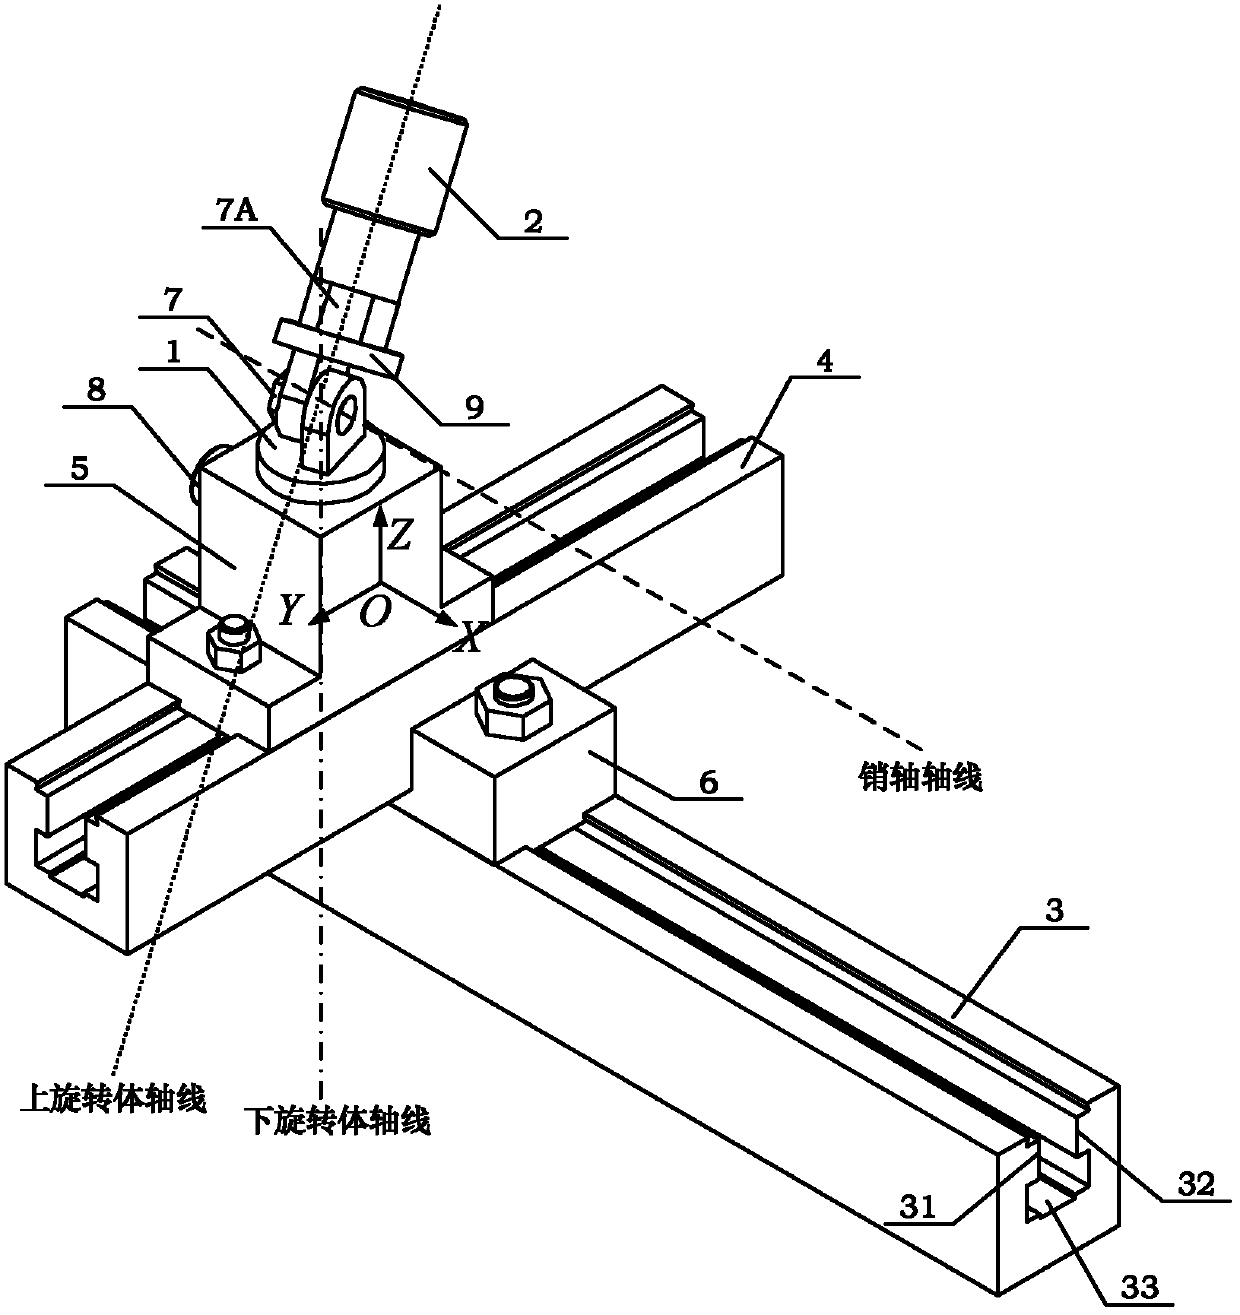 In-situ test positioning controllable mechanical loading and fixing device